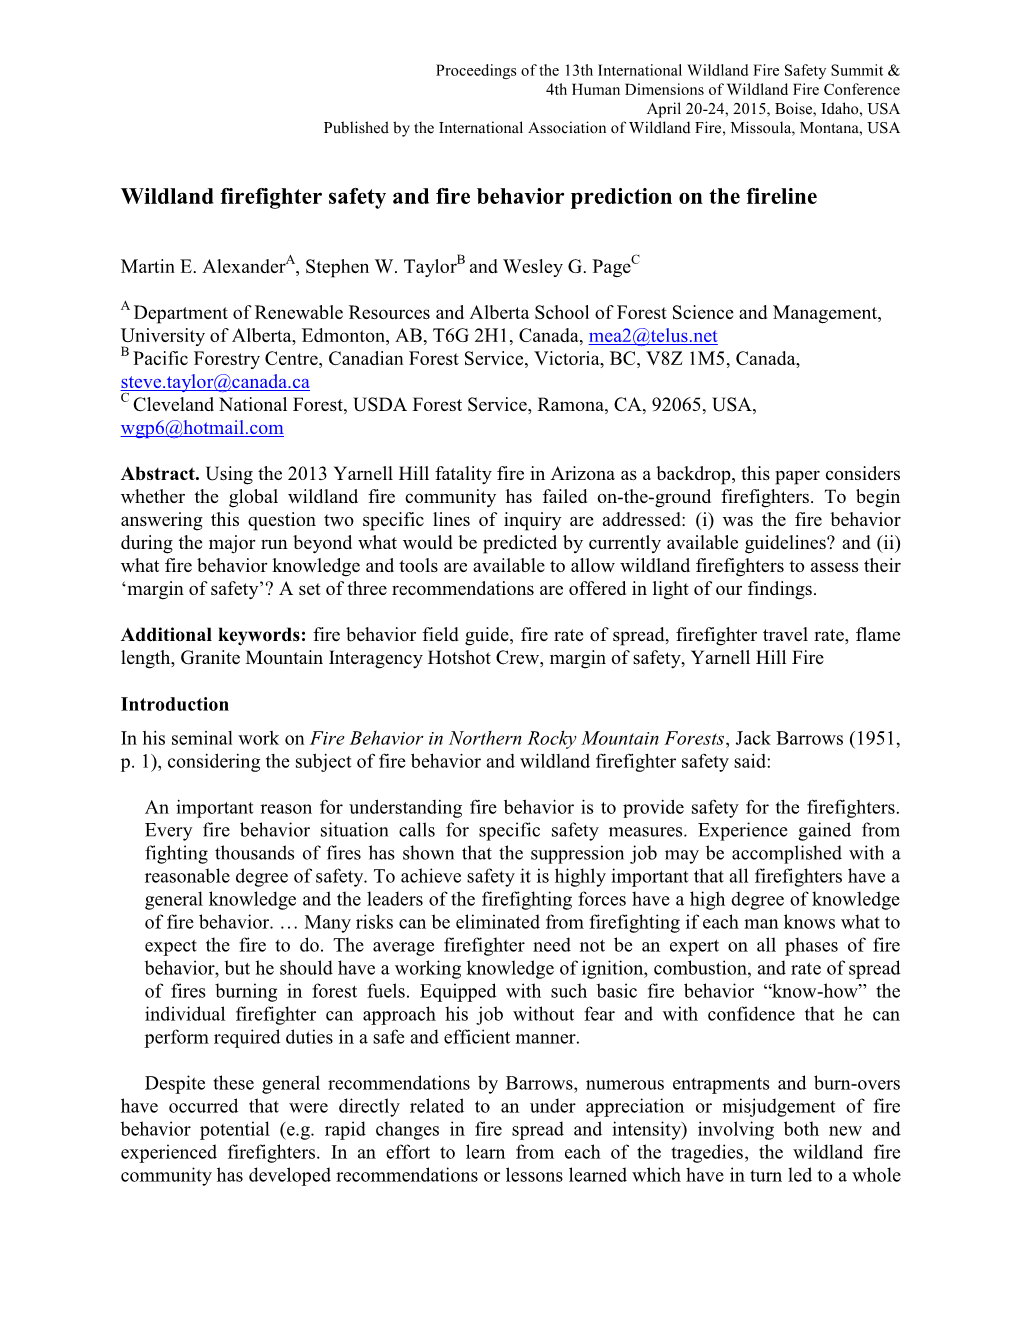 Wildland Firefighter Safety and Fire Behavior Prediction on the Fireline